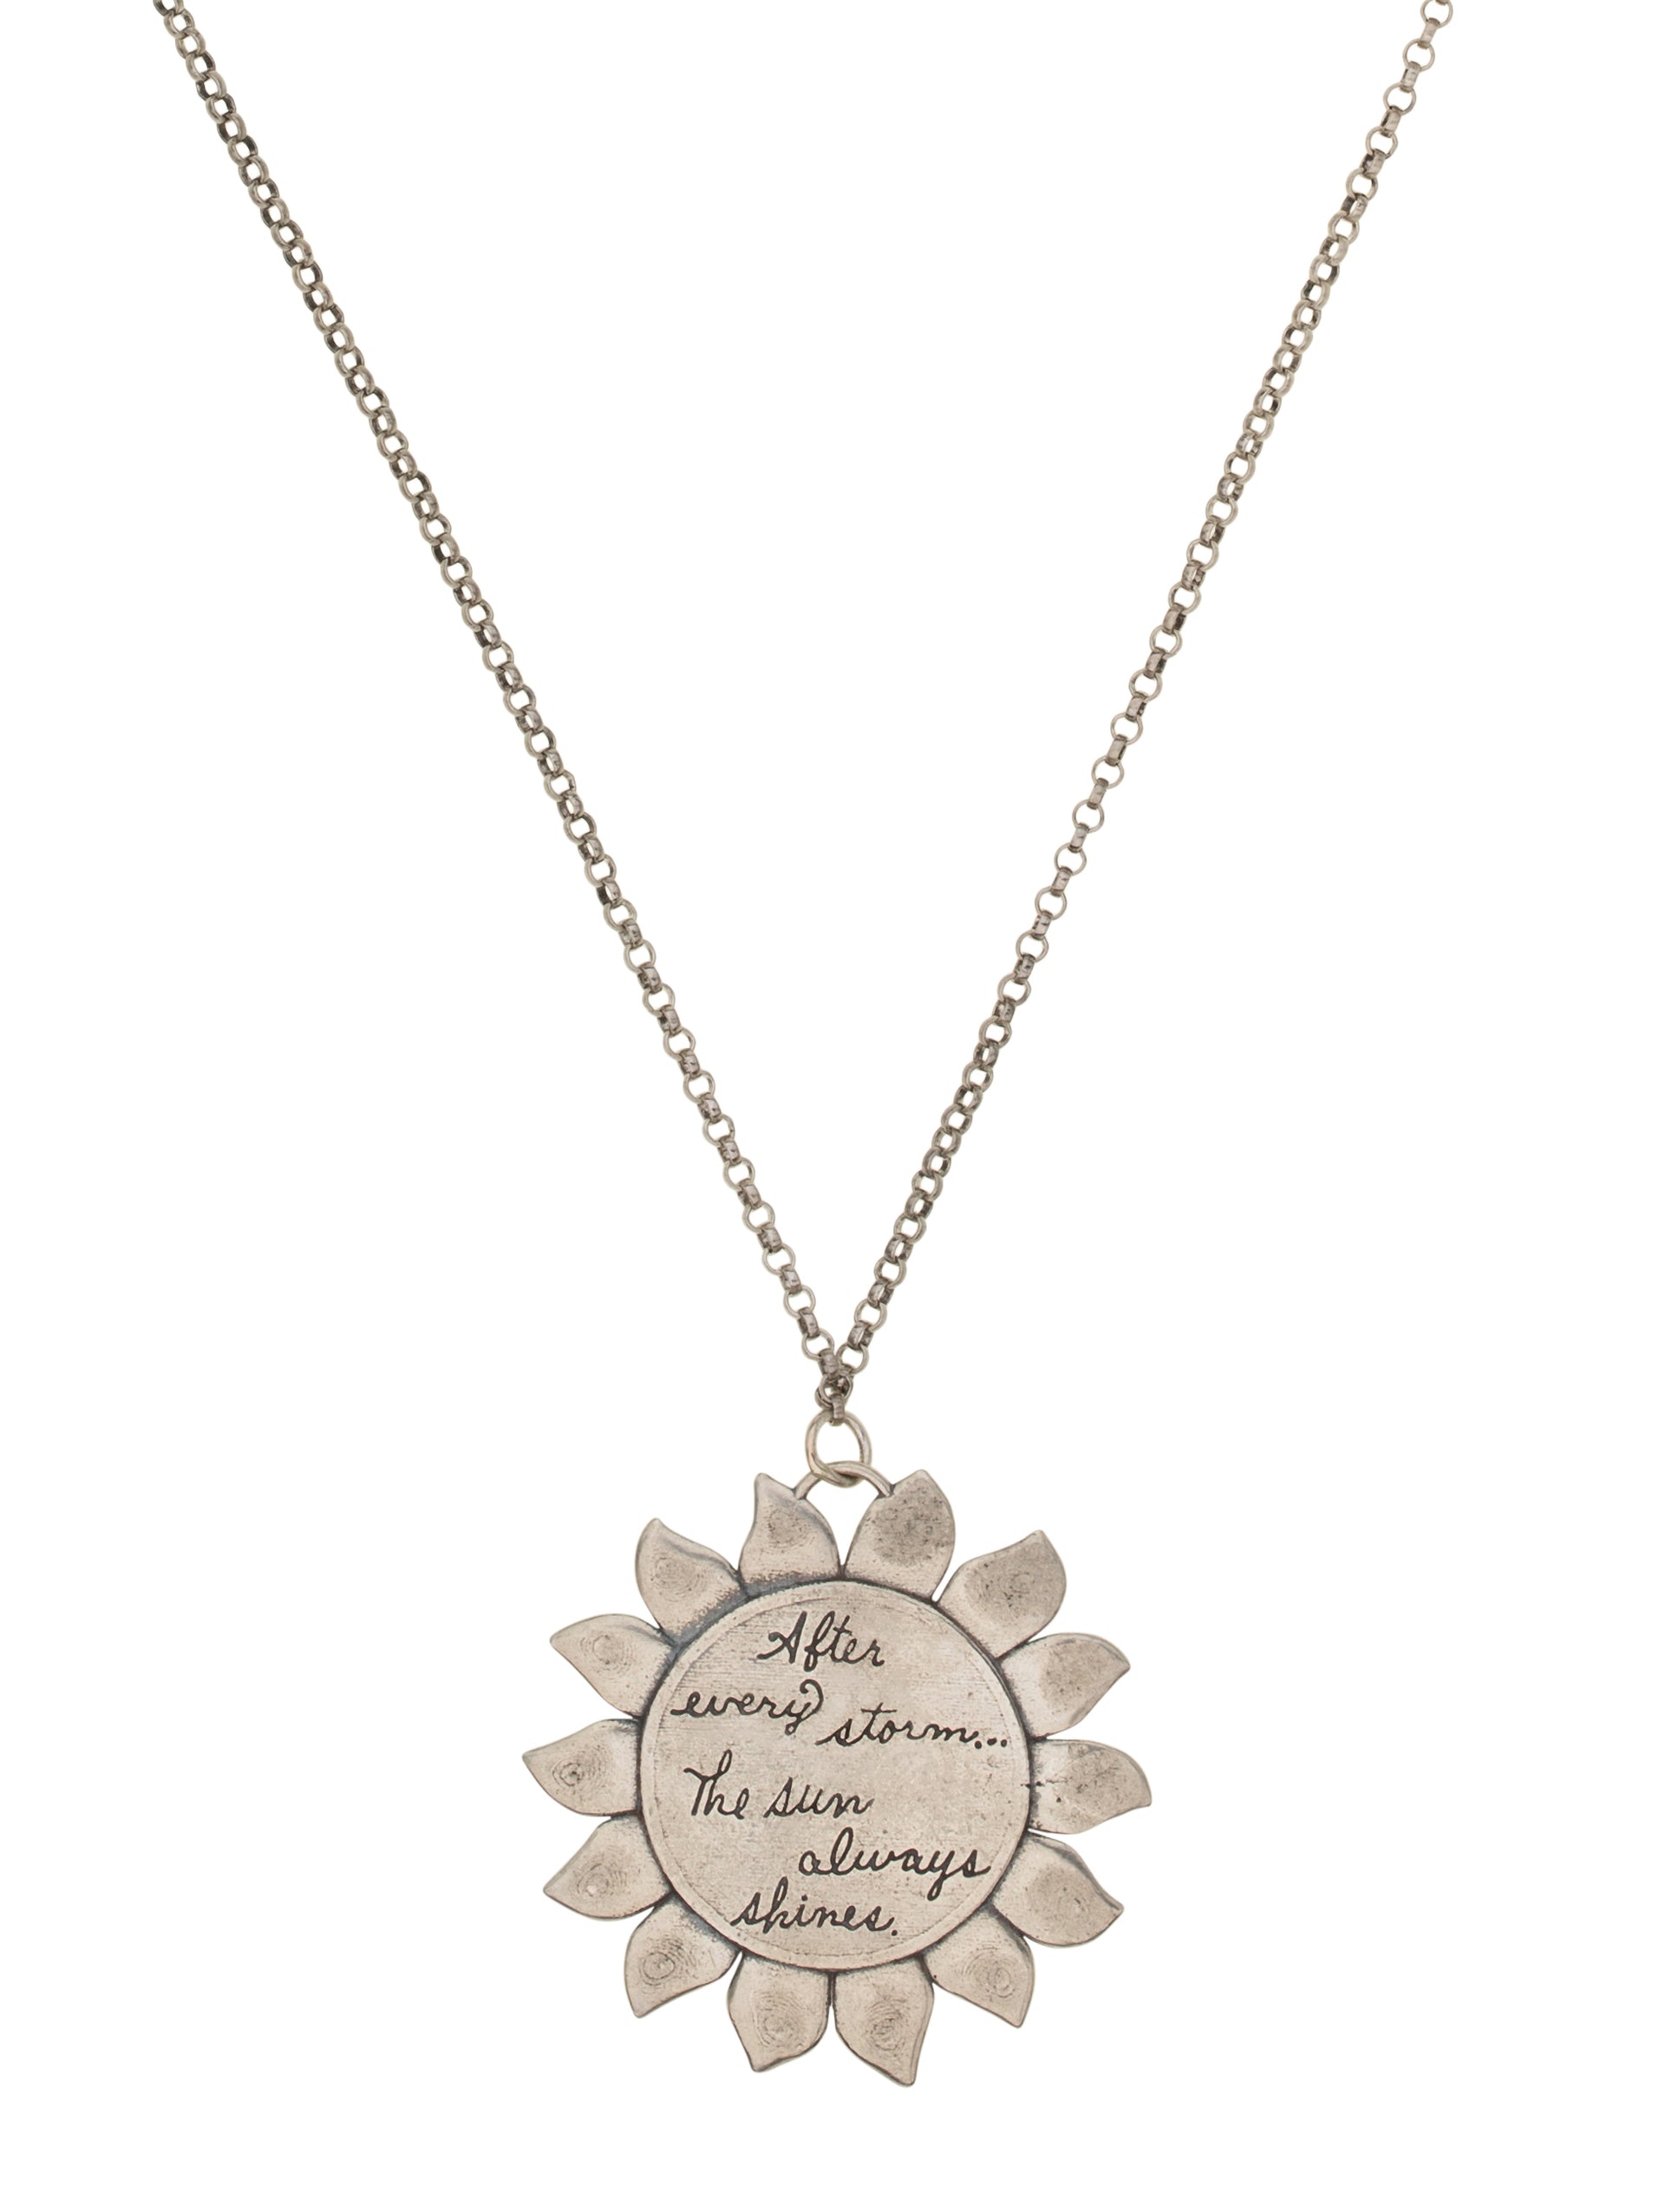 The Sun Always Shines Necklace